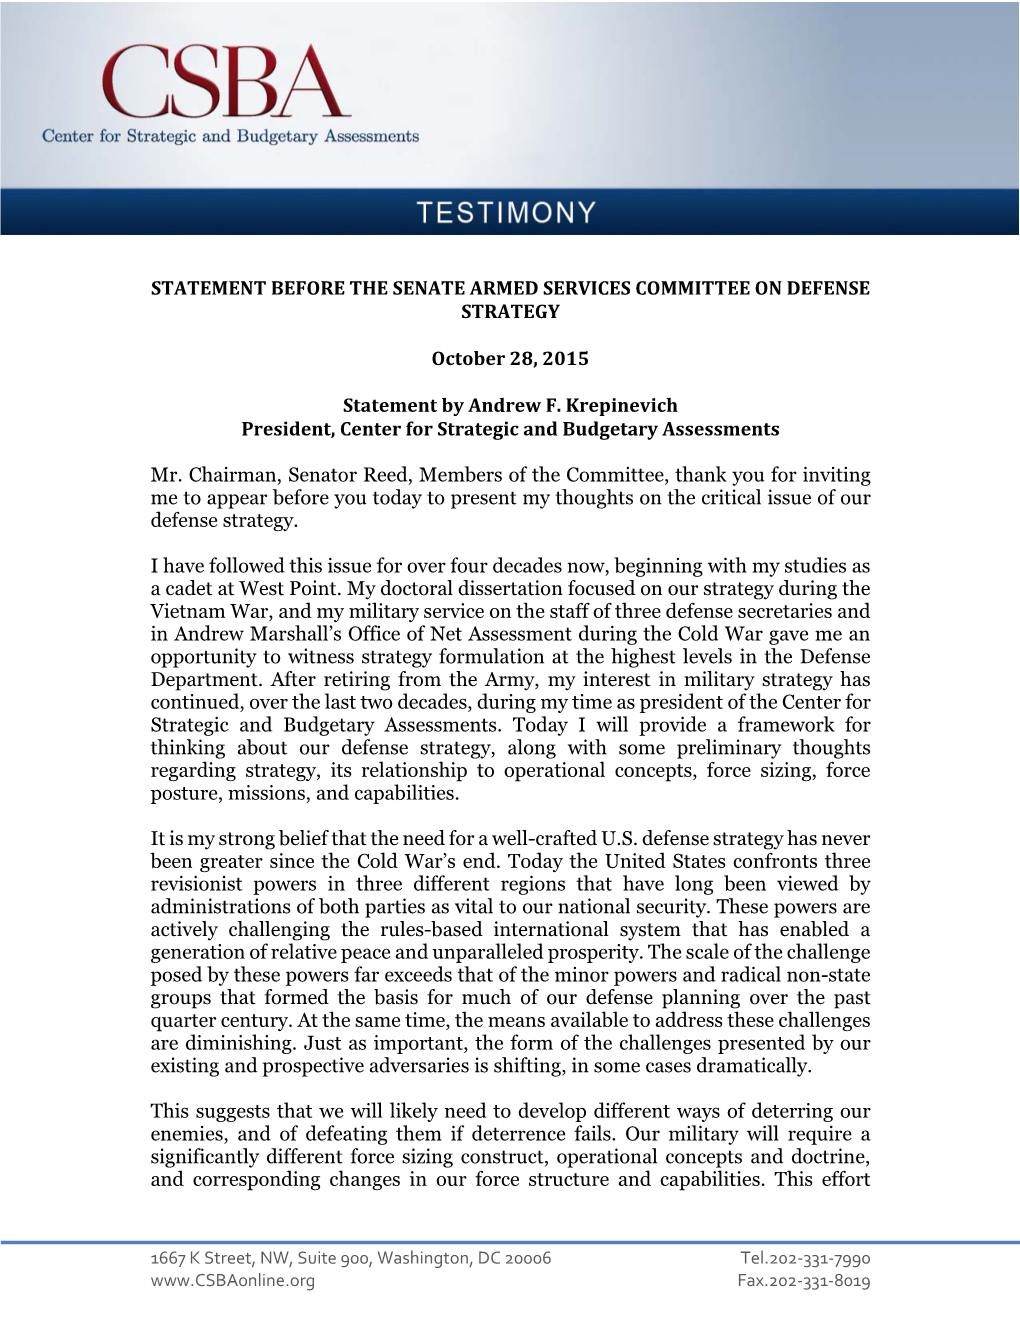 Statement Before the Senate Armed Services Committee on Defense Strategy